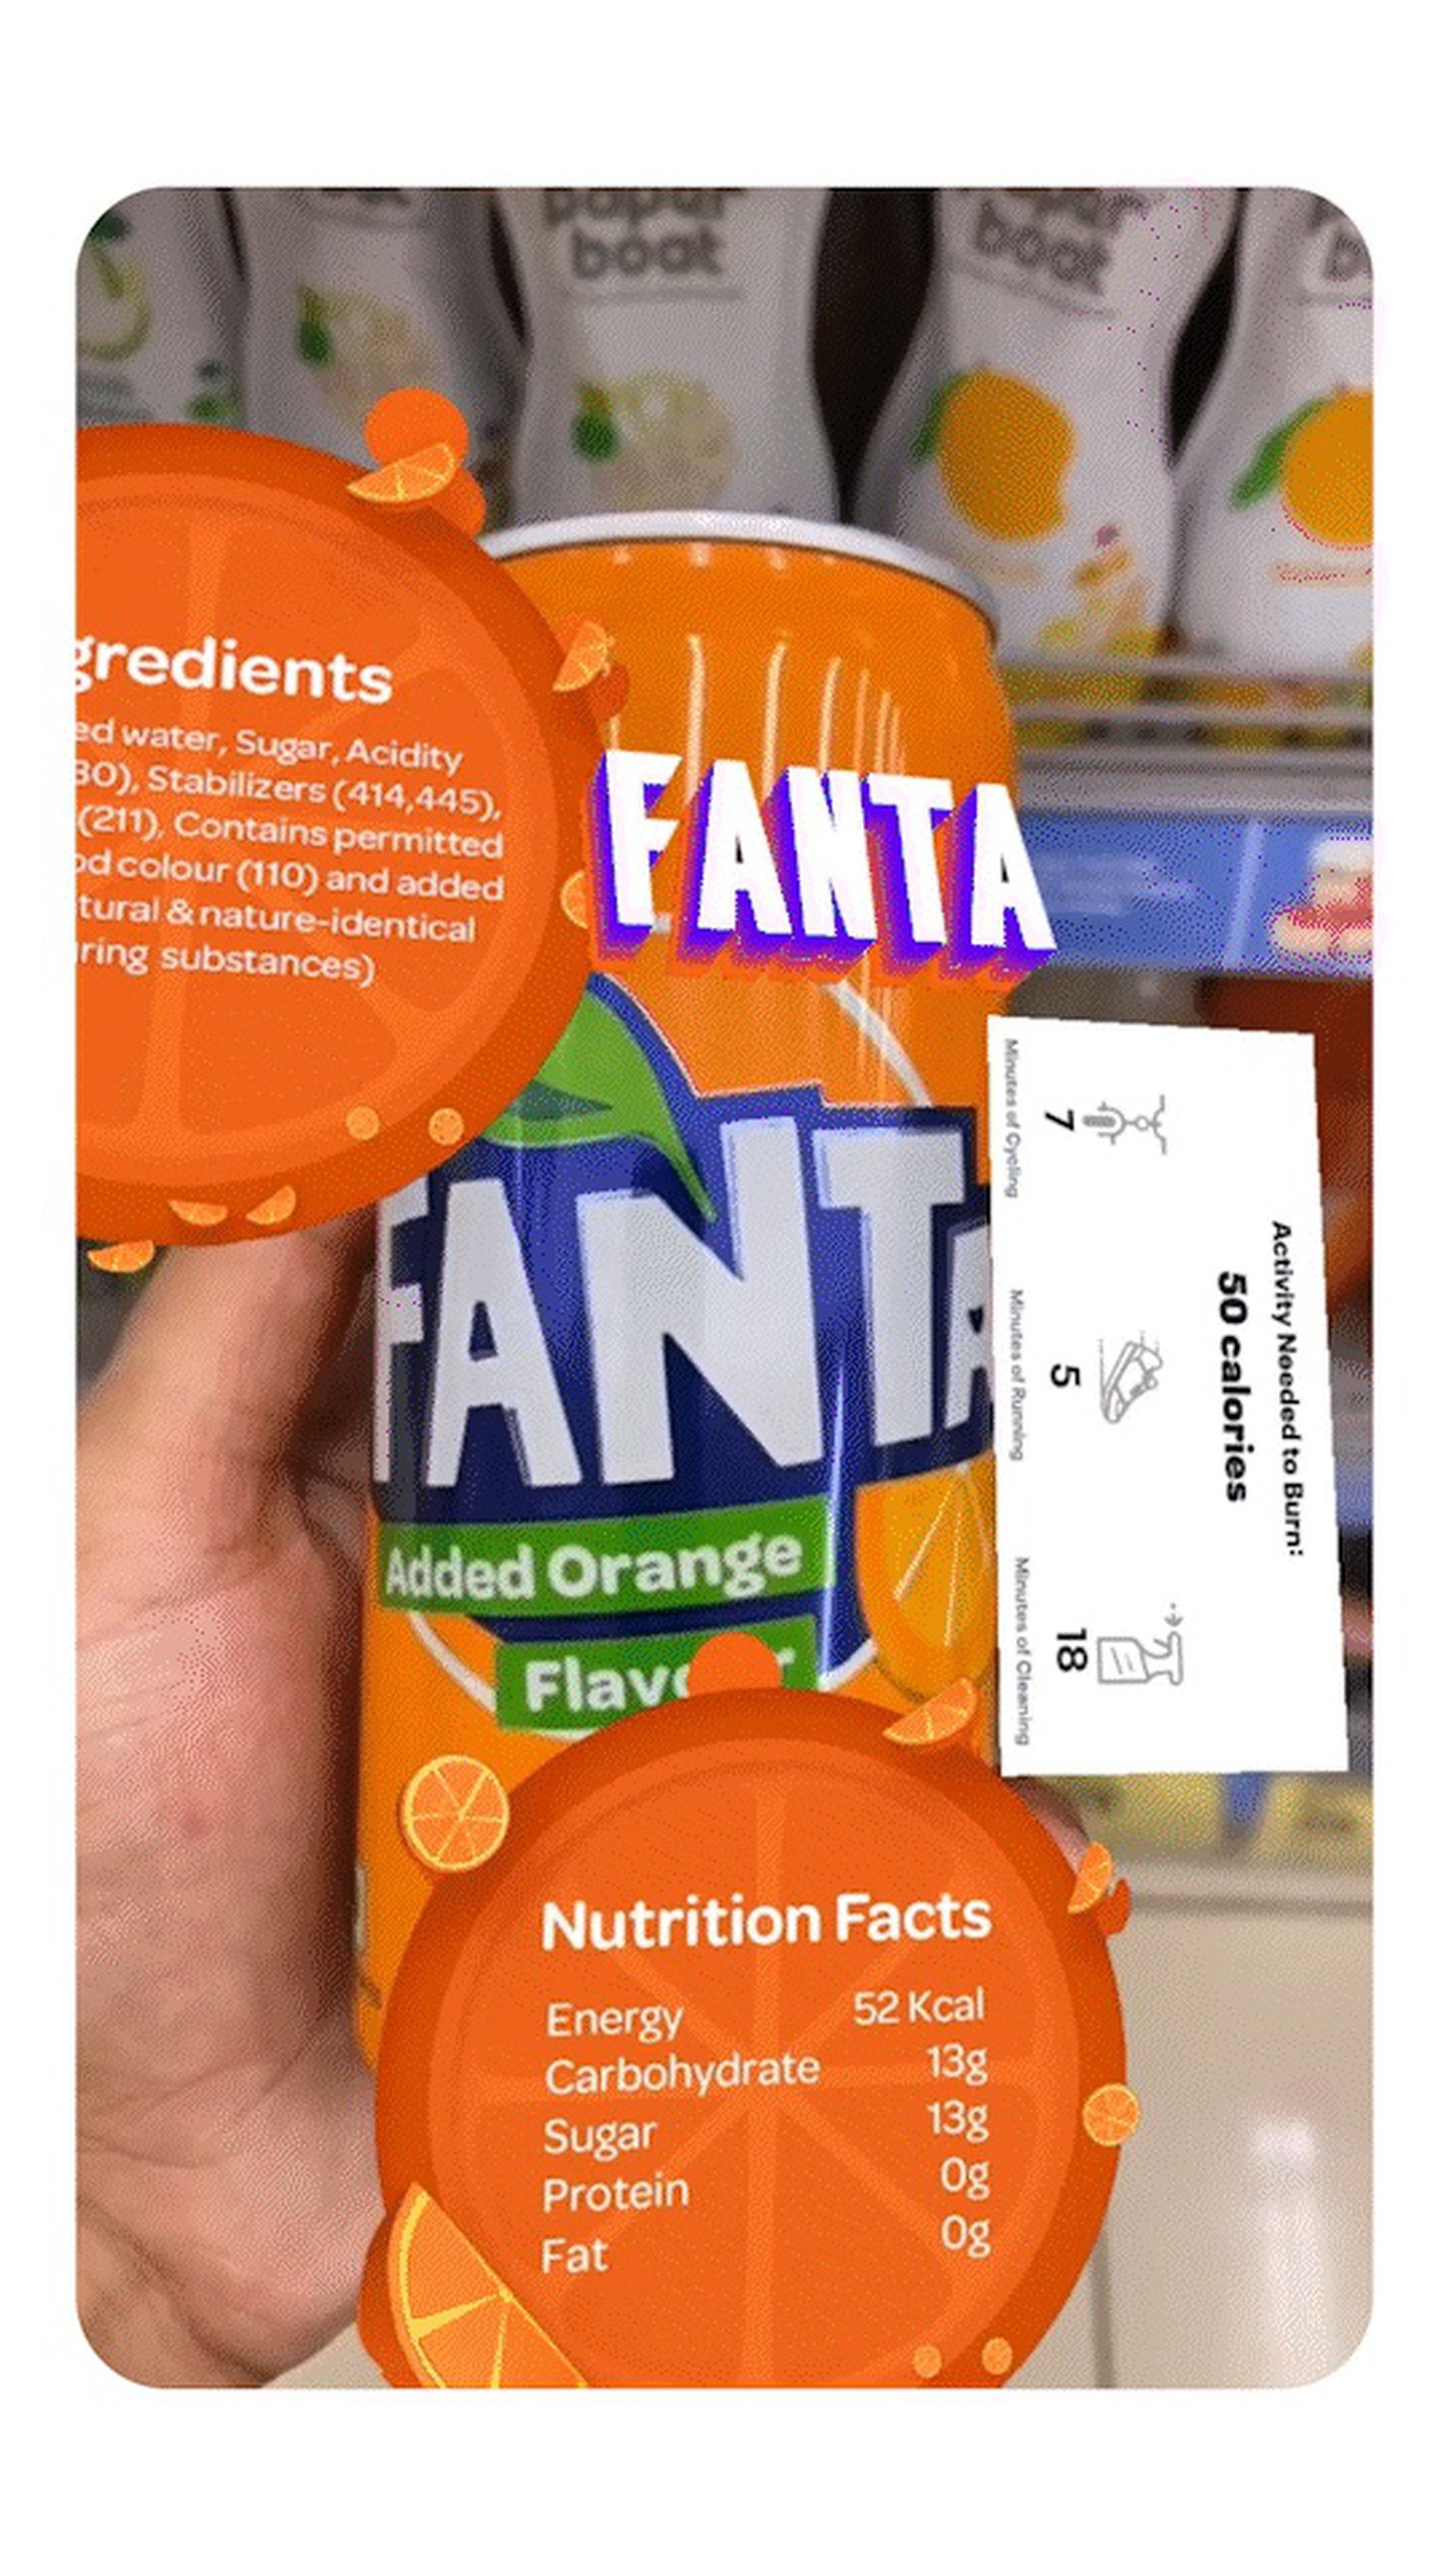 A Fanta can showing virtual ingredients and nutrition labels popping up around the physical can.